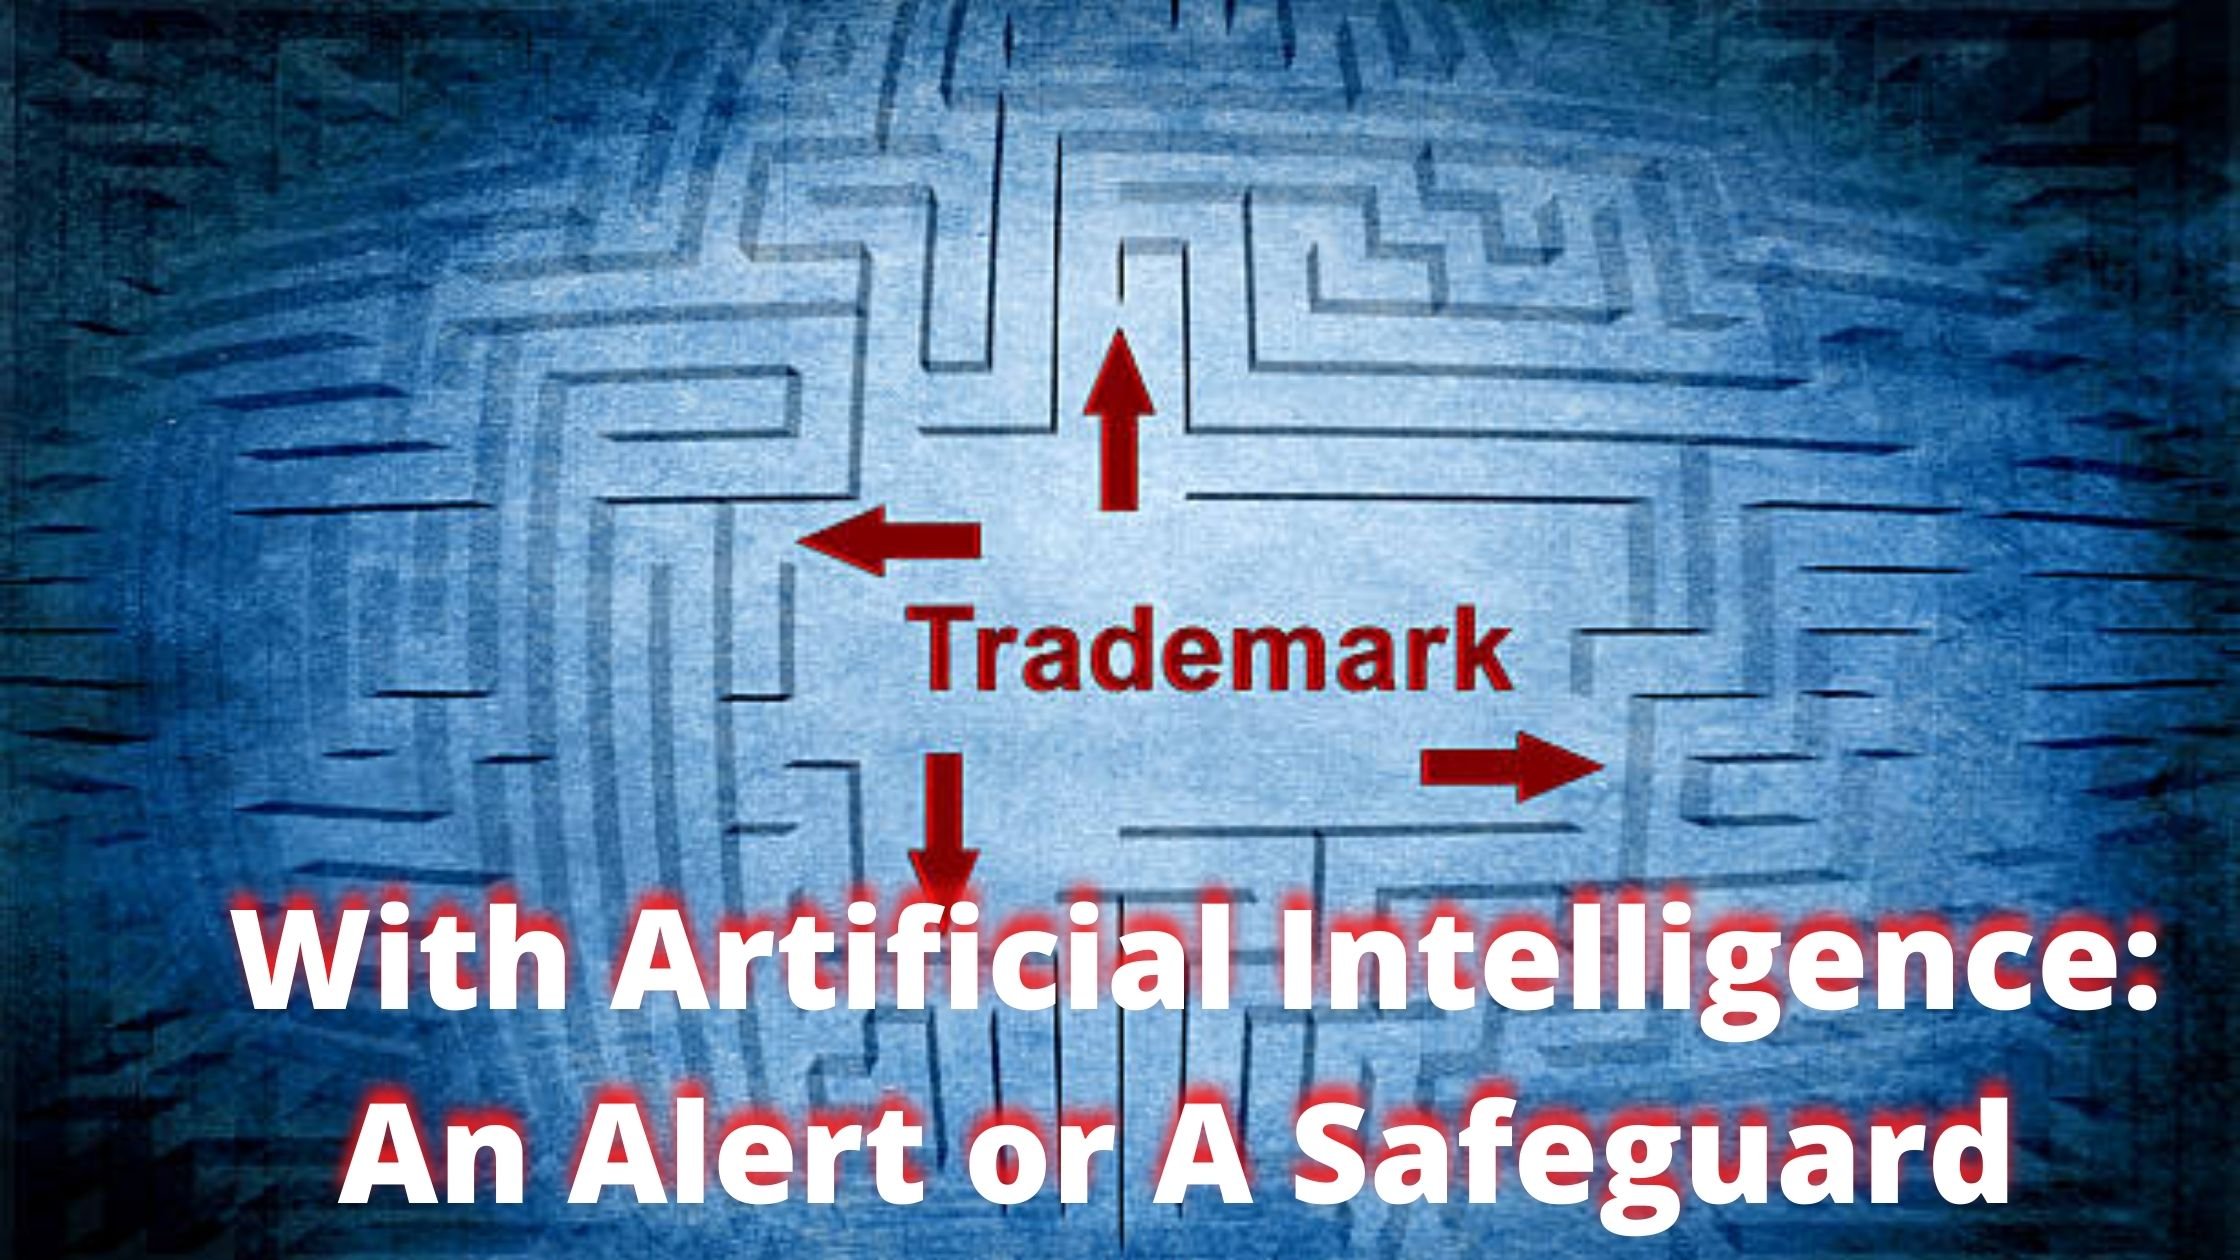 Trademark law with Artificial Intelligence: An Alert or A Safeguard